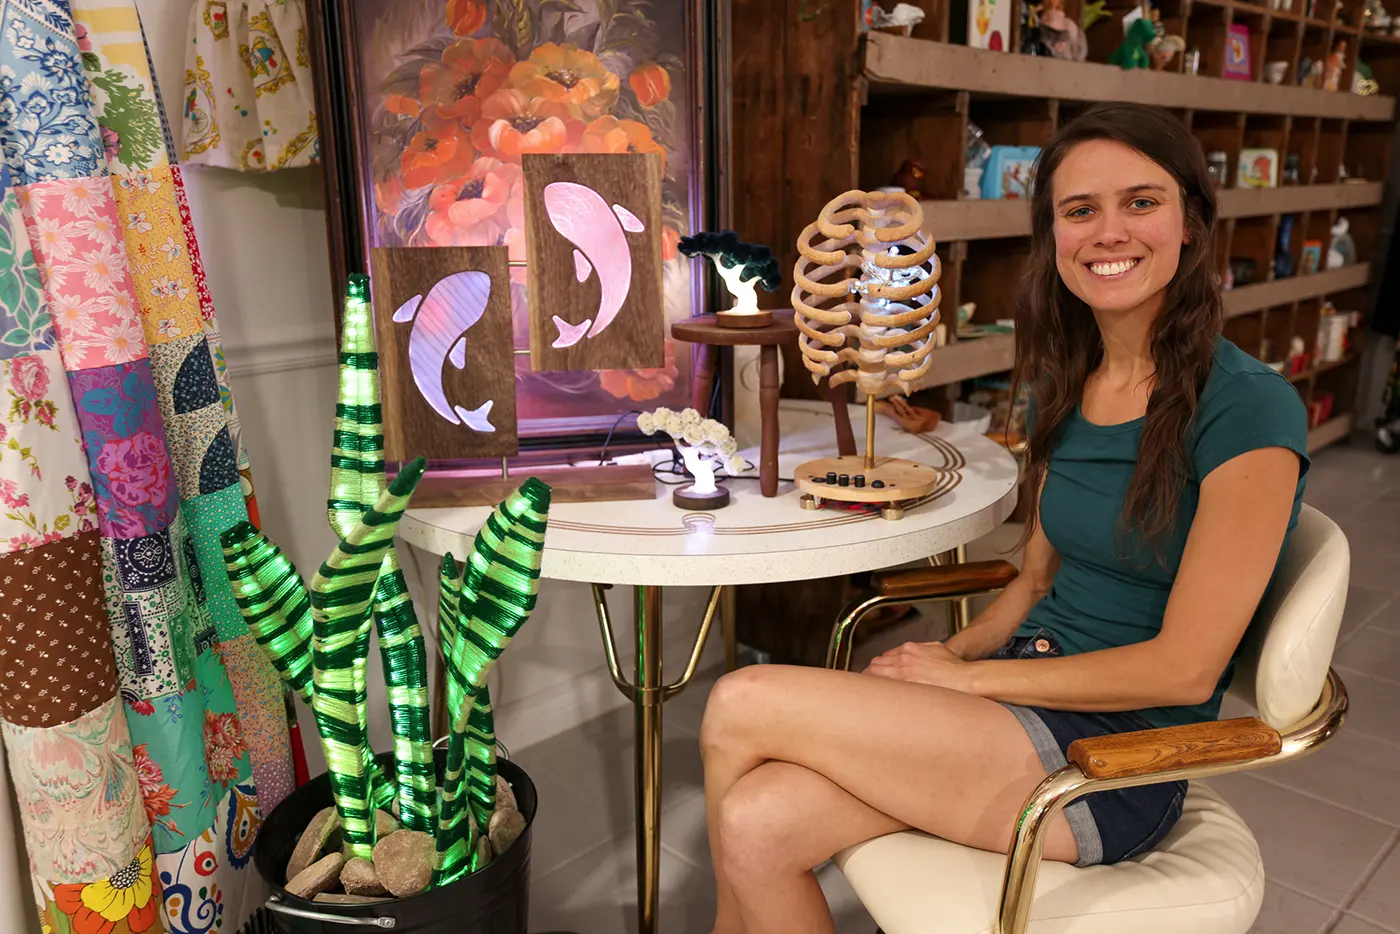 Michelle Sharer sits next to a few of her creations, including colorful sculptures on seaweed, koi fish and a ribcage.